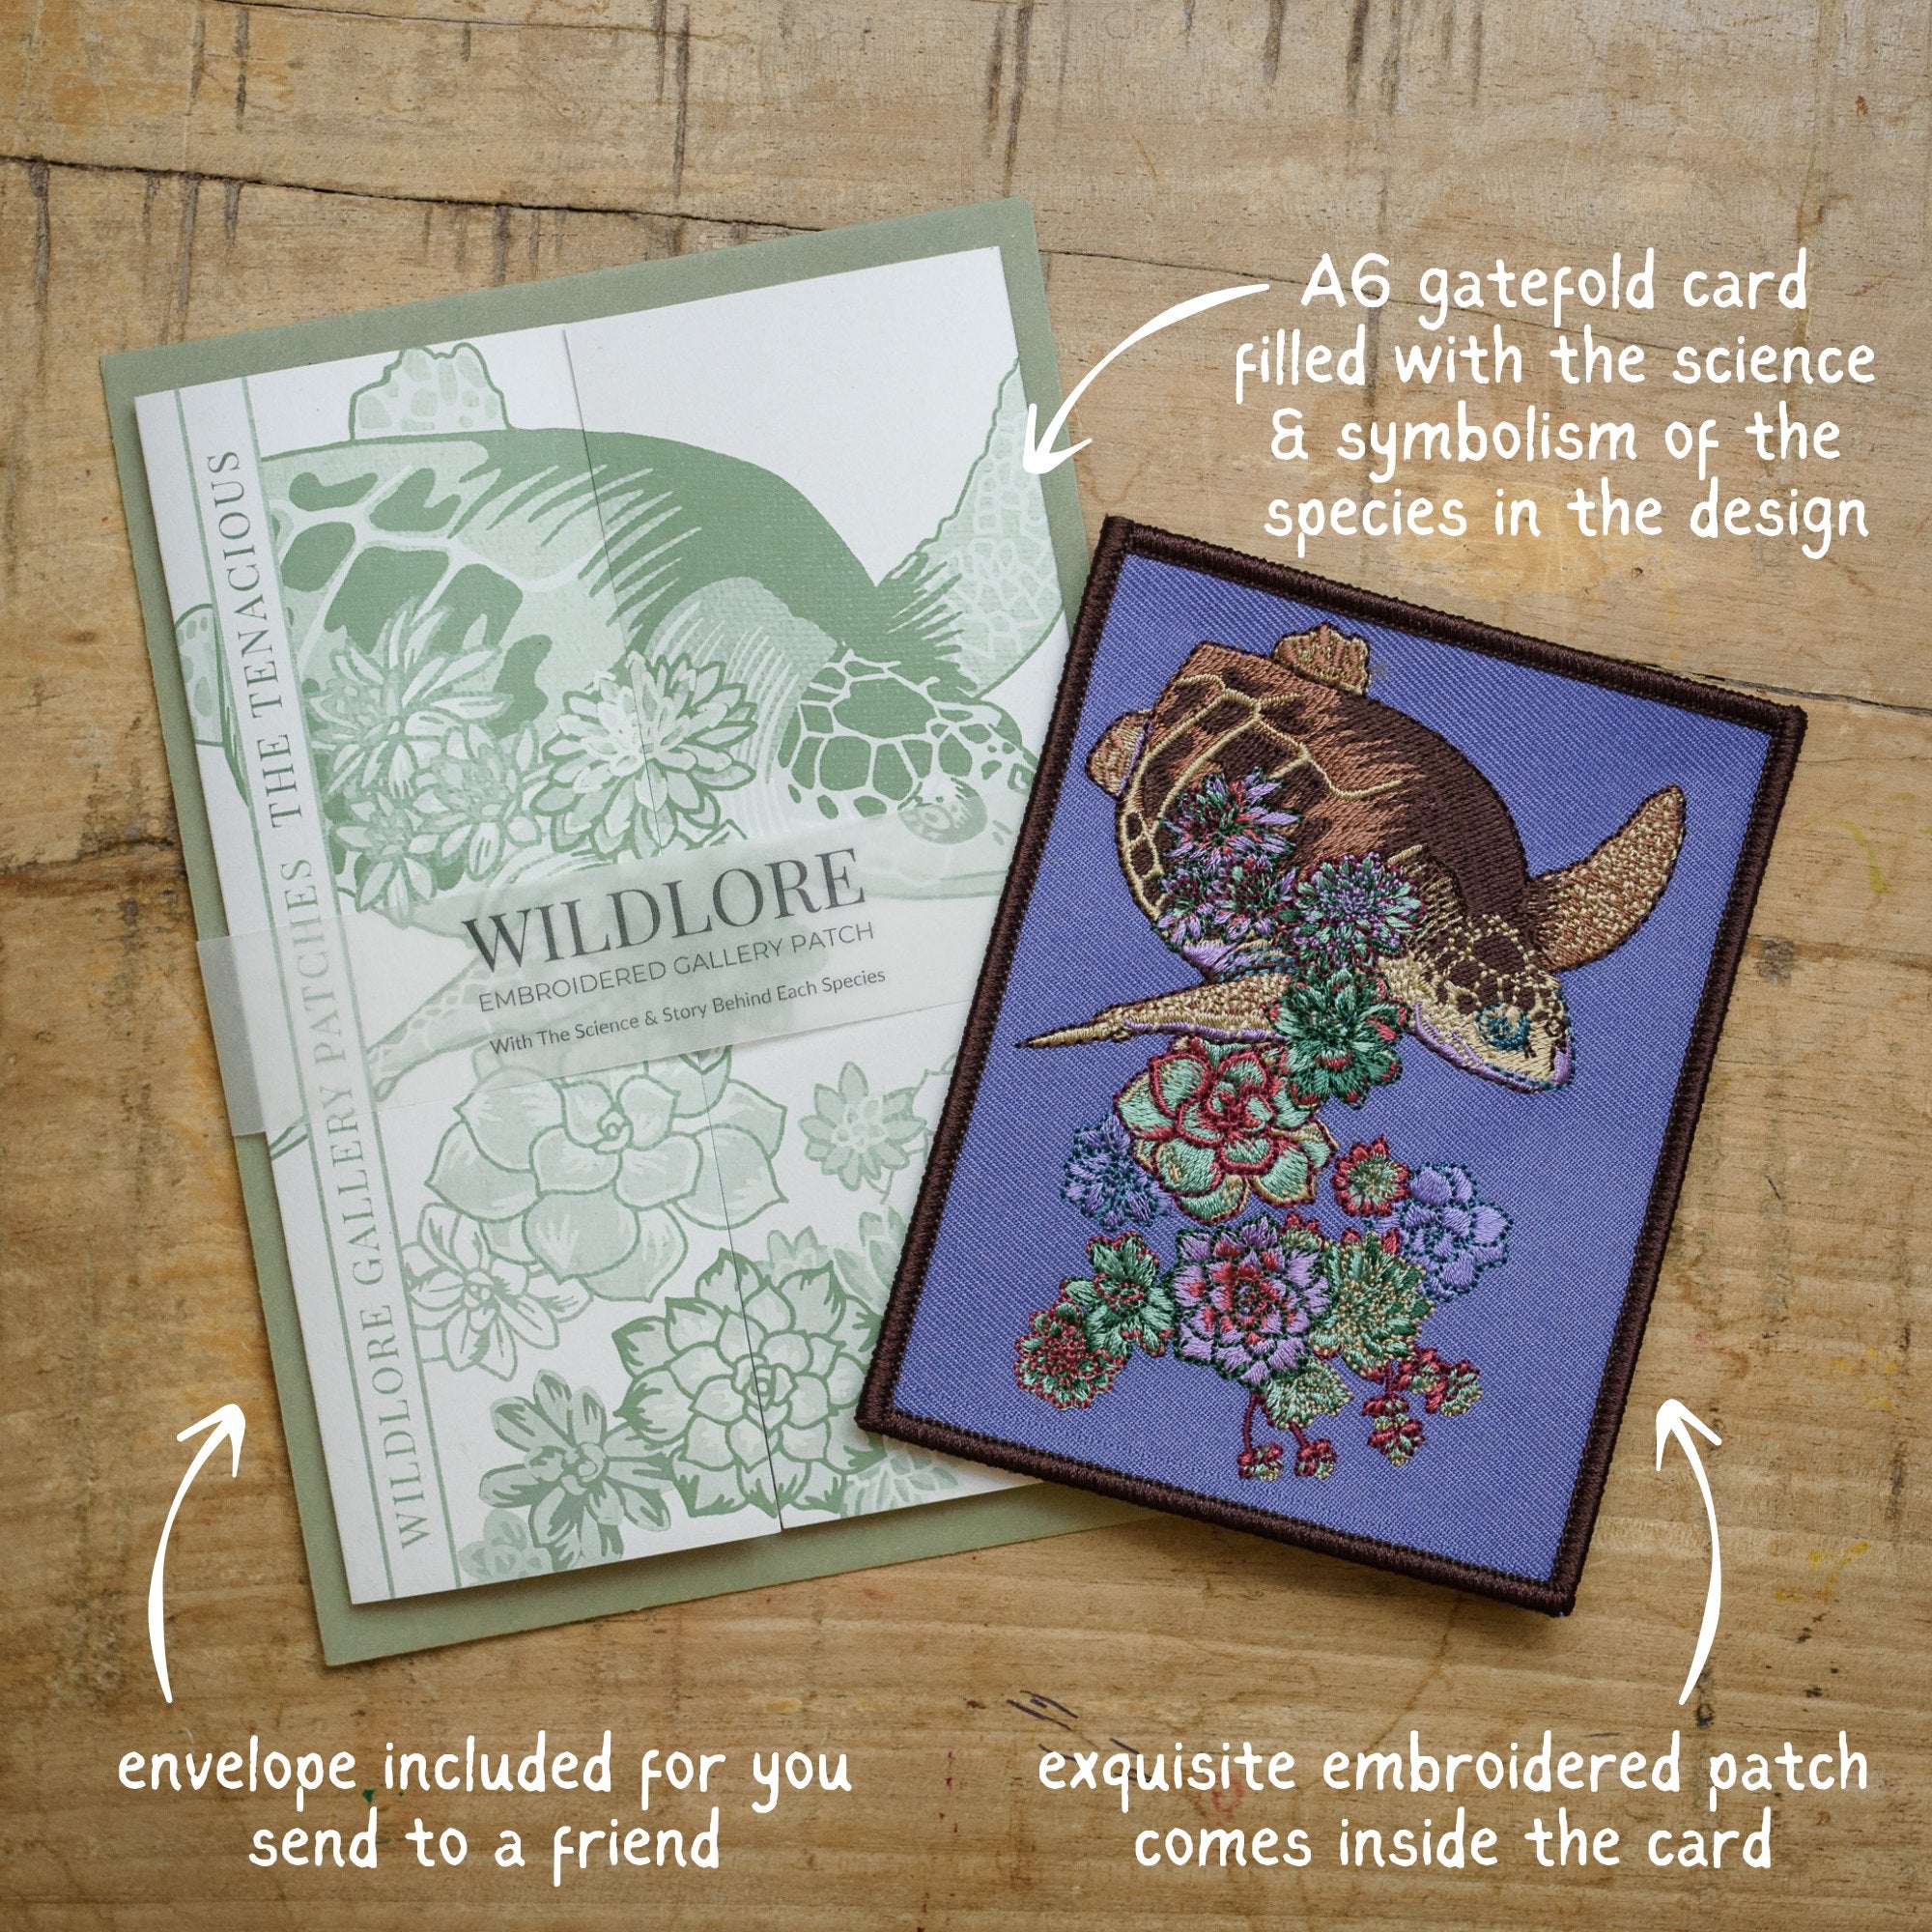 Turtle Succulent Embroidered Patch in gatefold card with science and story behind the species